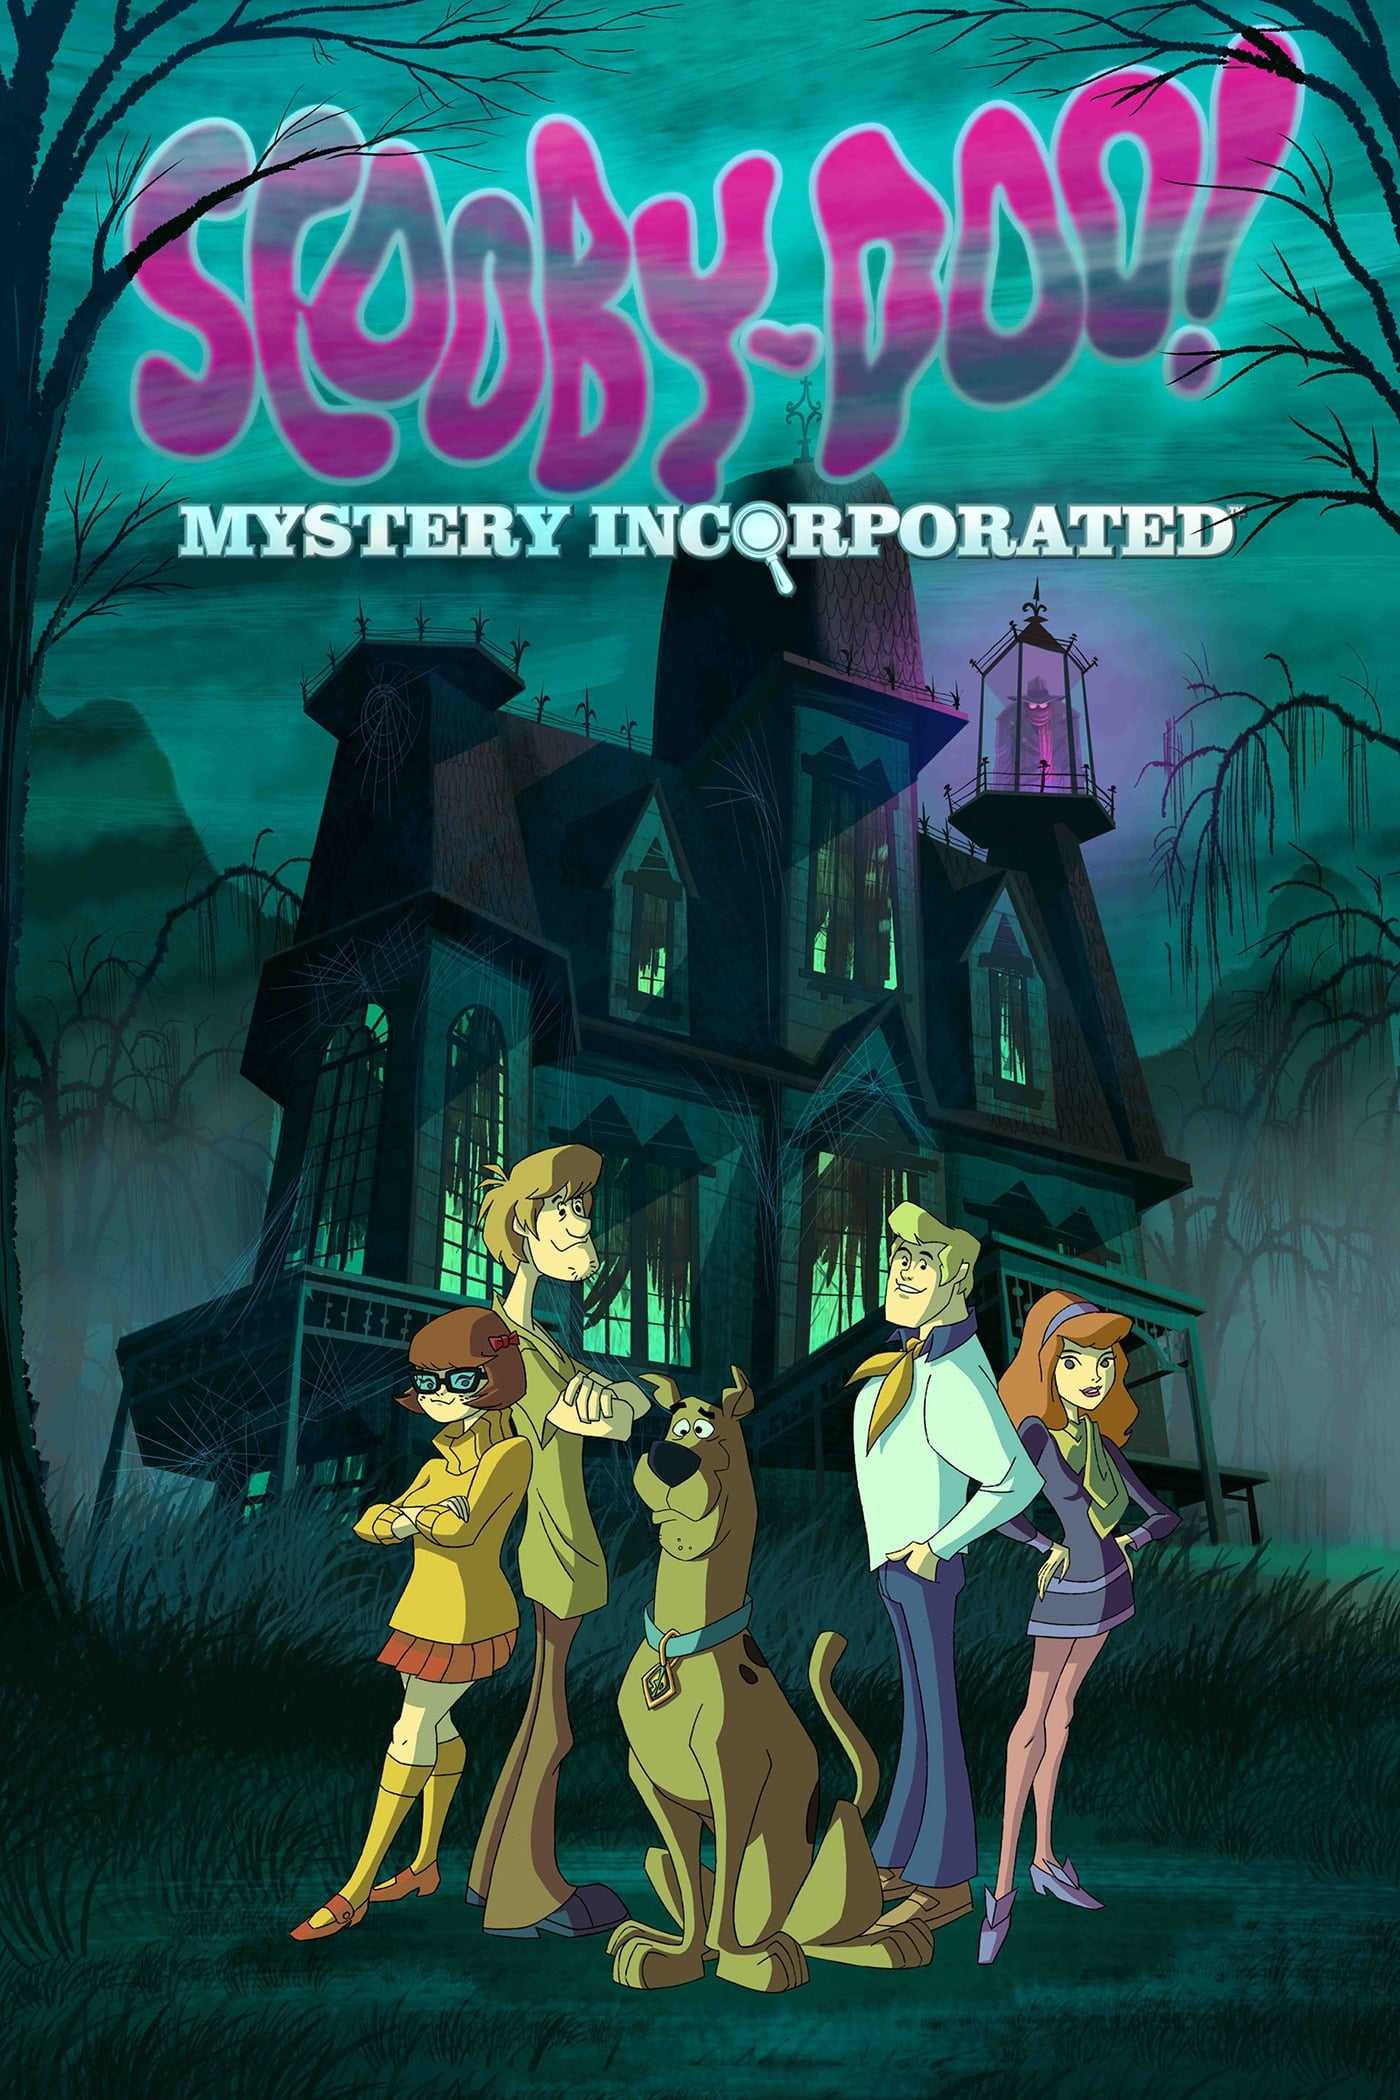 Scooby-Doo! Mystery Incorporated in streaming